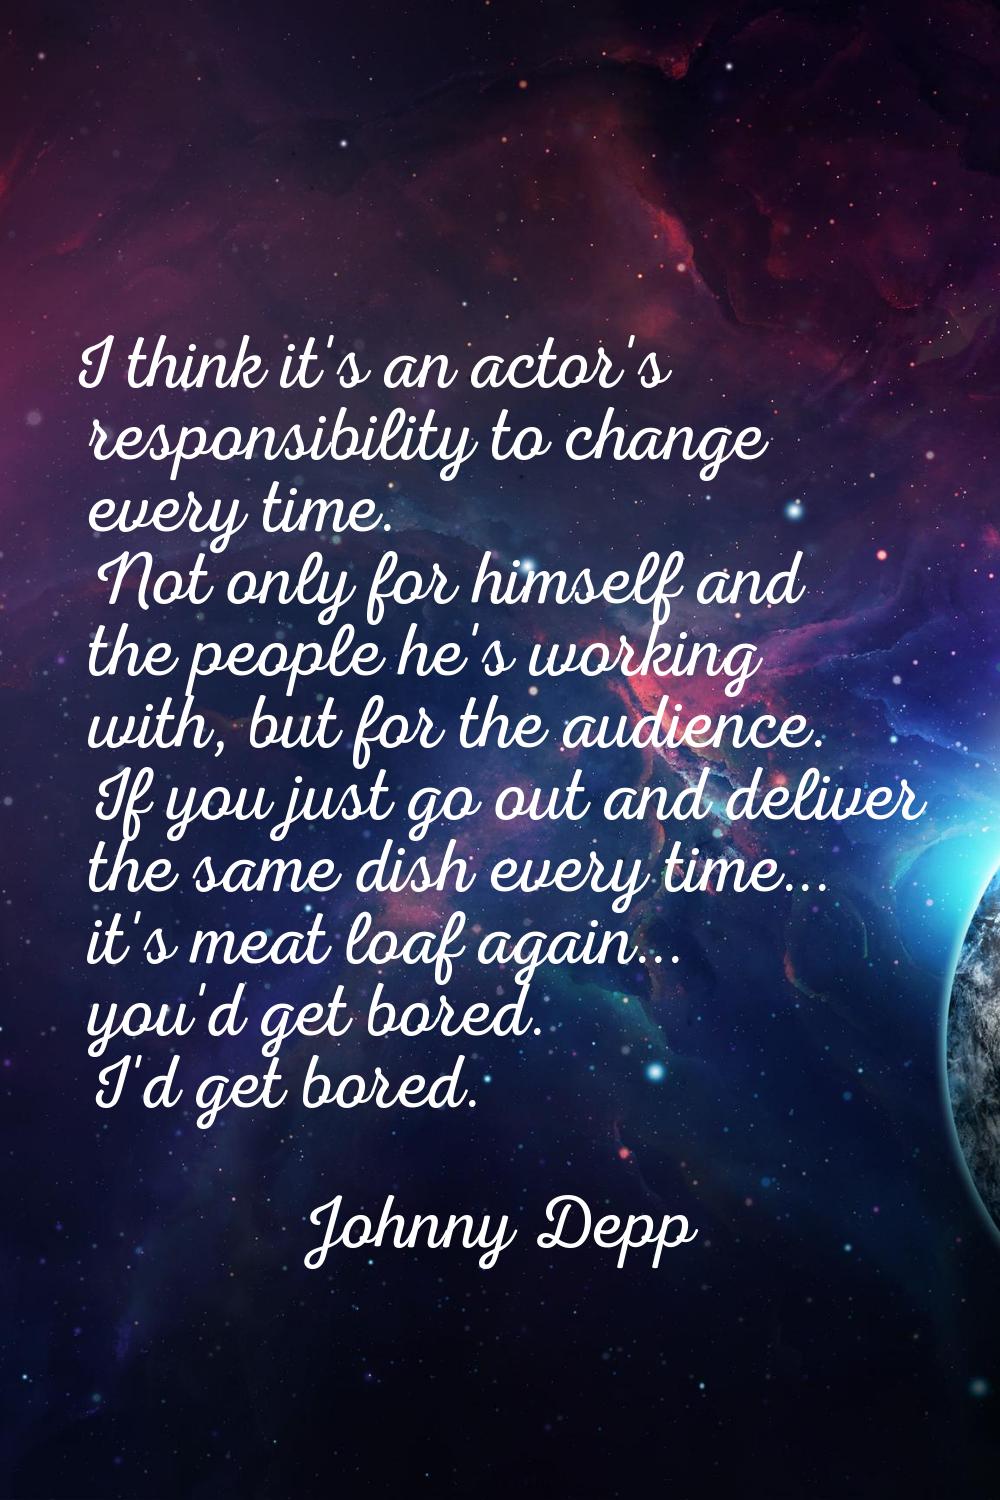 I think it's an actor's responsibility to change every time. Not only for himself and the people he